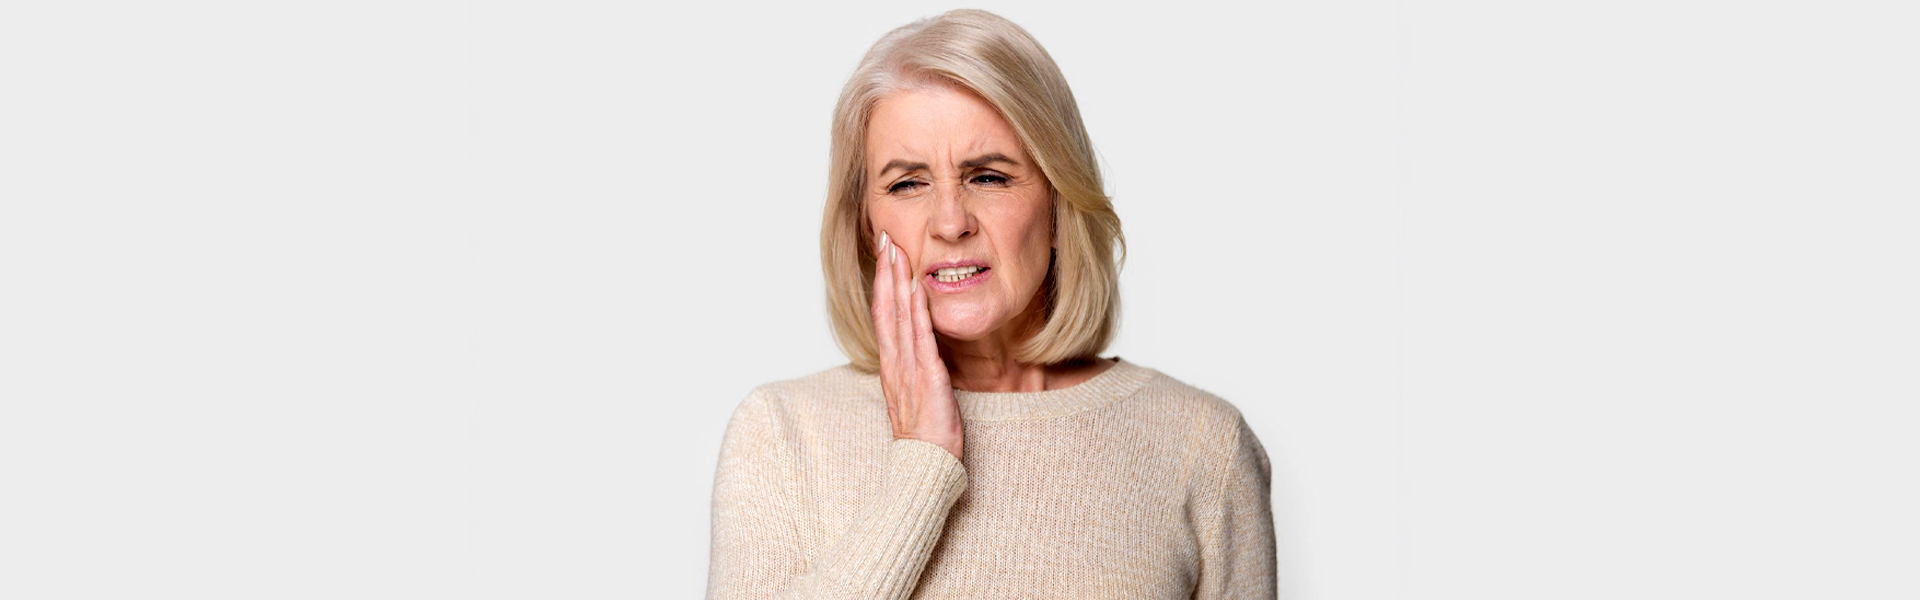 How to Care for Implant-Supported Dentures